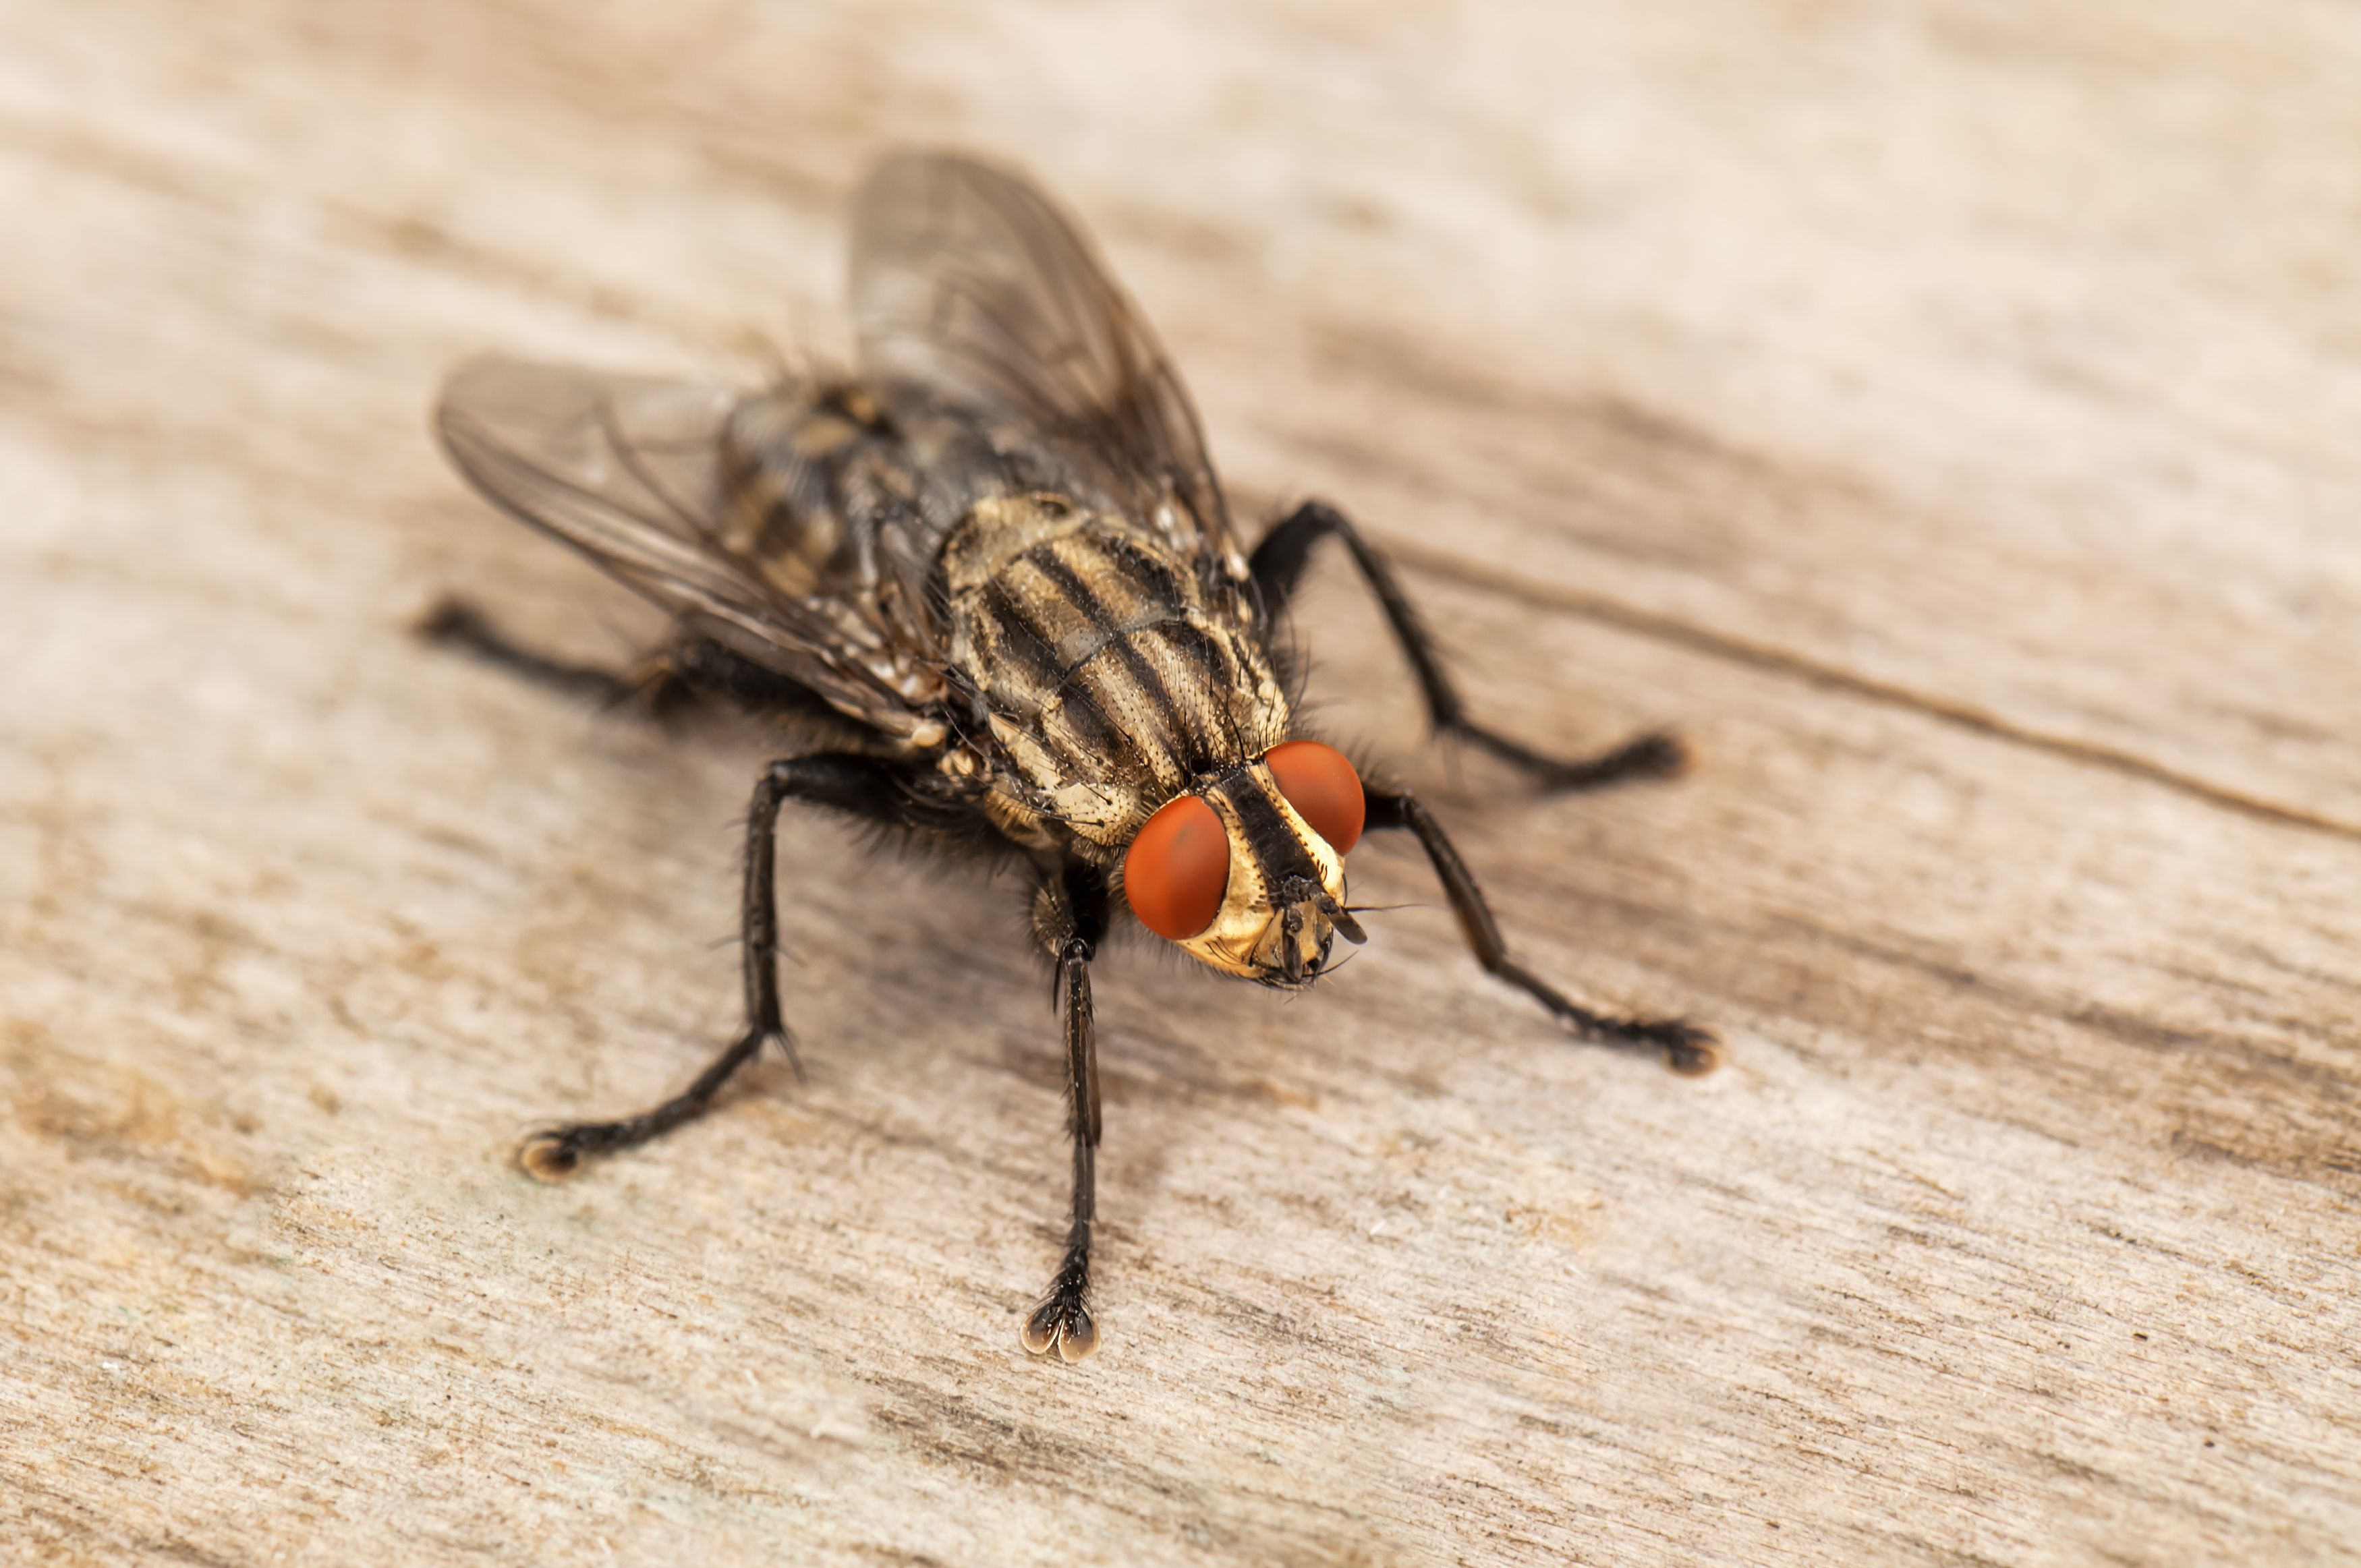 10 Effective Ways to Get Rid of Houseflies at Home Naturally and Safely